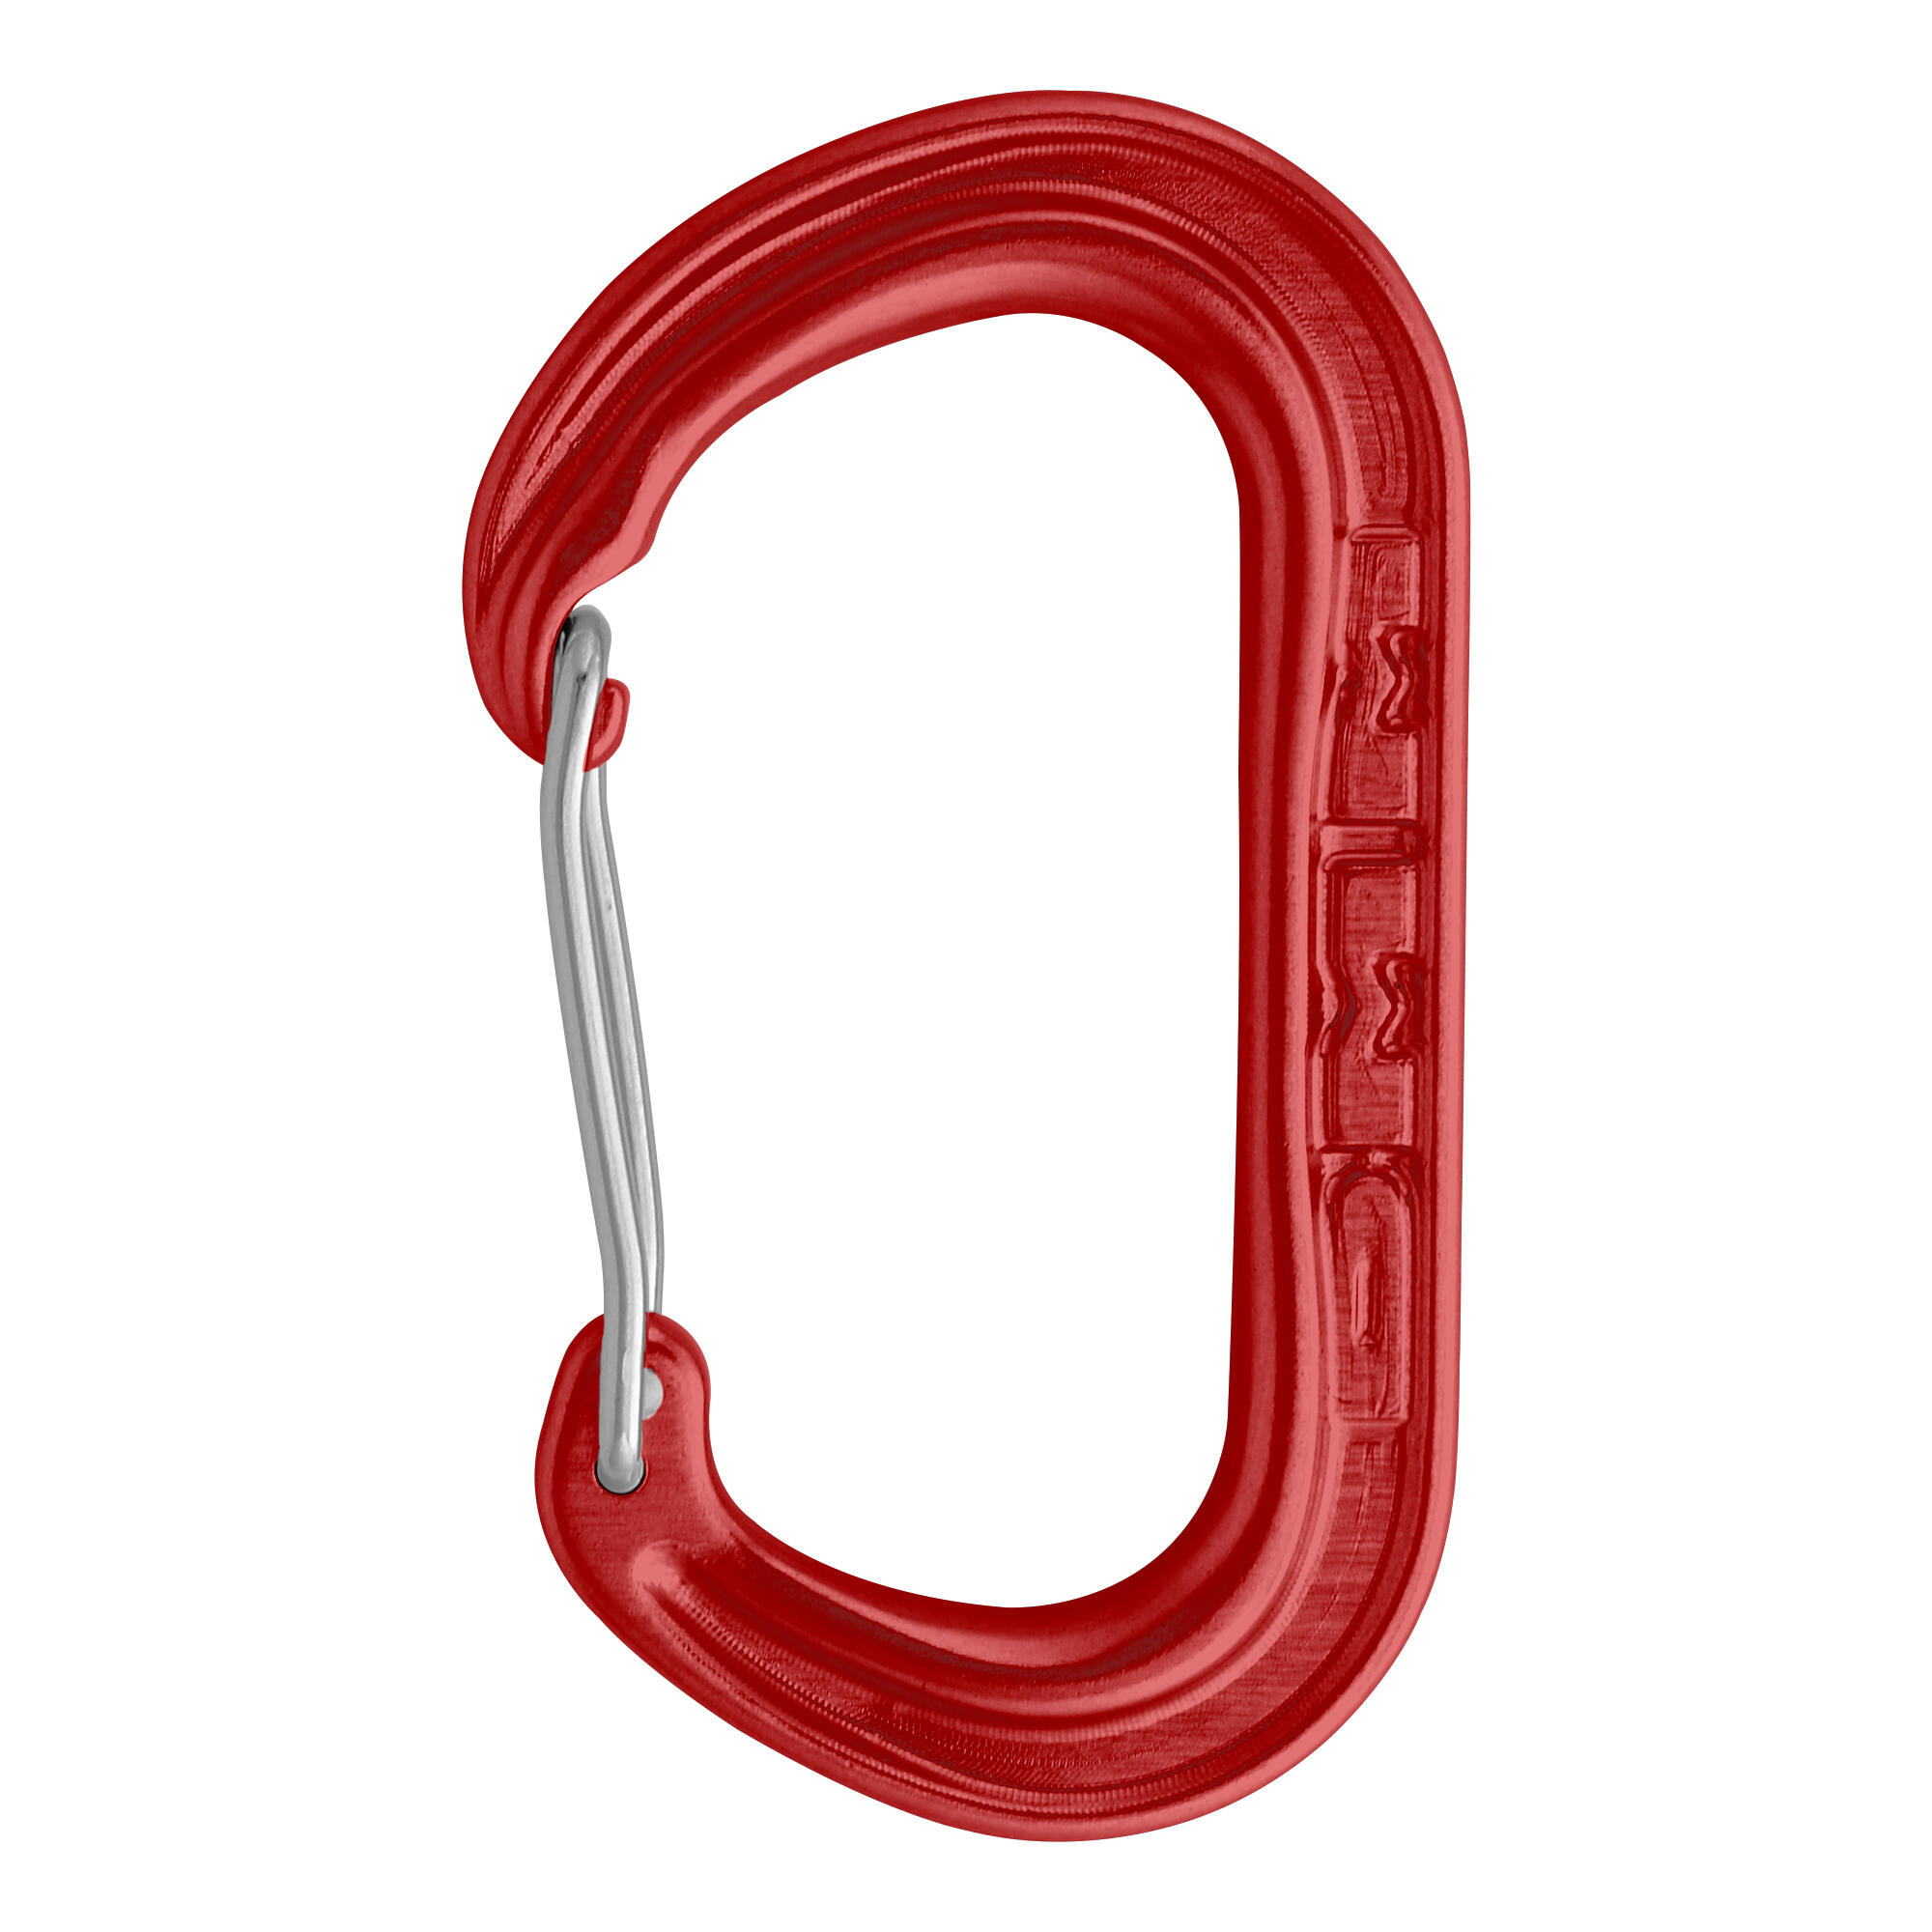 DMM XSRE Wire Accessory Carabiner - Red